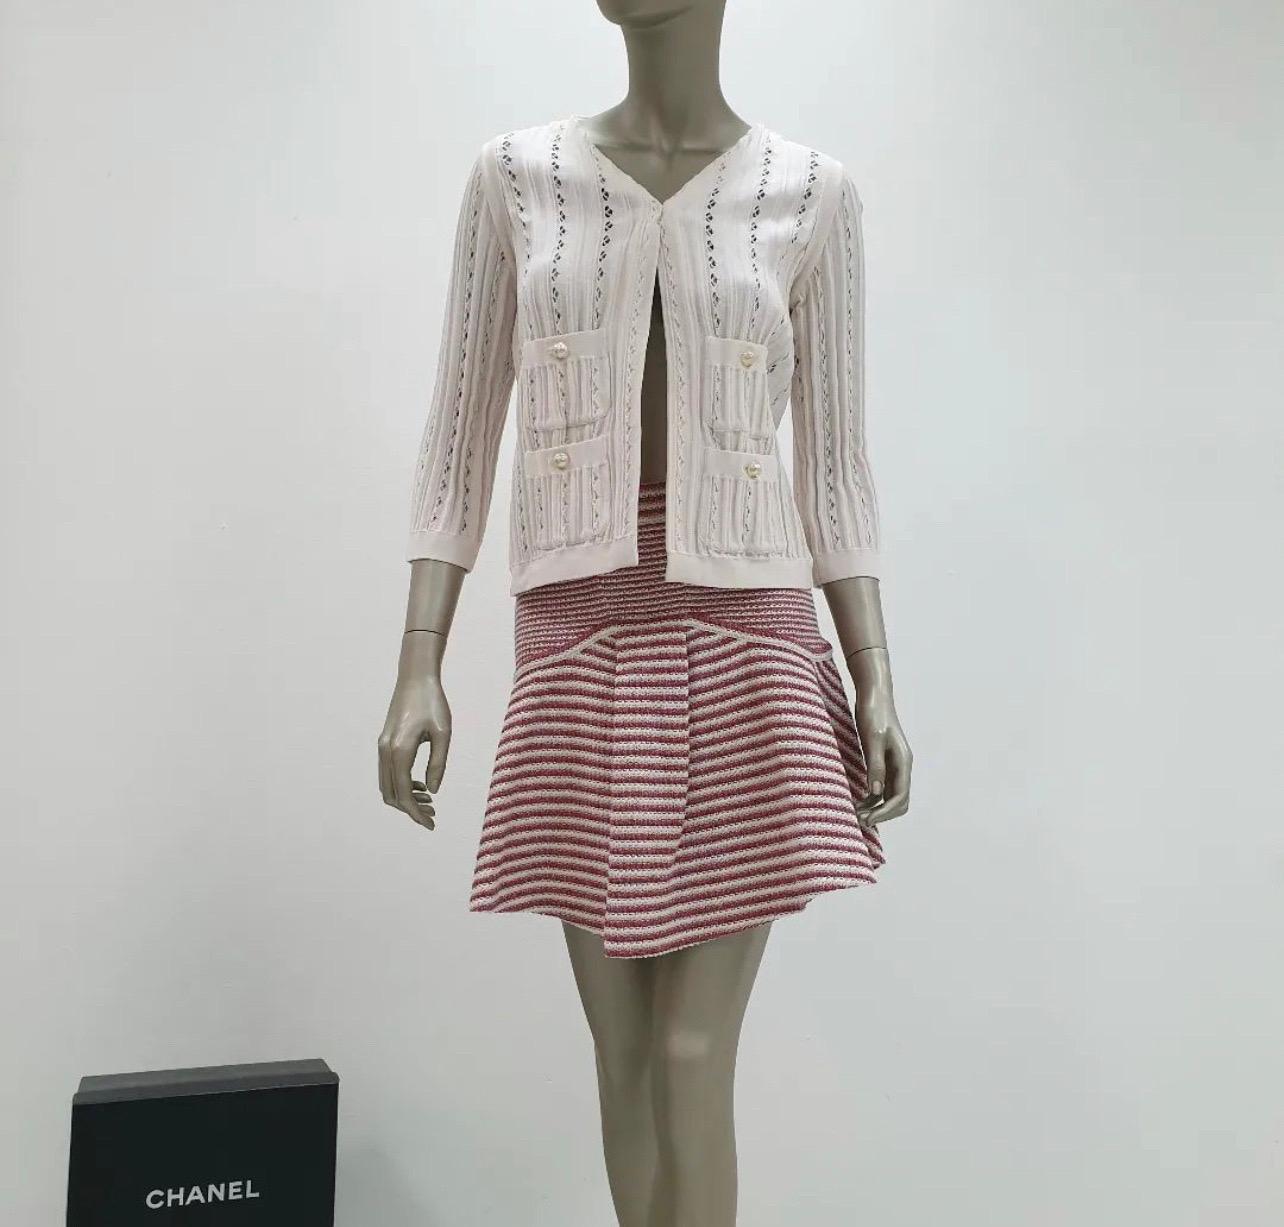 Chanel Red/White Striped Knitted Flare Mini Skirt.

Side white invisible zip detail.

Chanel button side detail.

Chanel white lining.

Estimate Retail: $3250

Size 34

Very good condition.